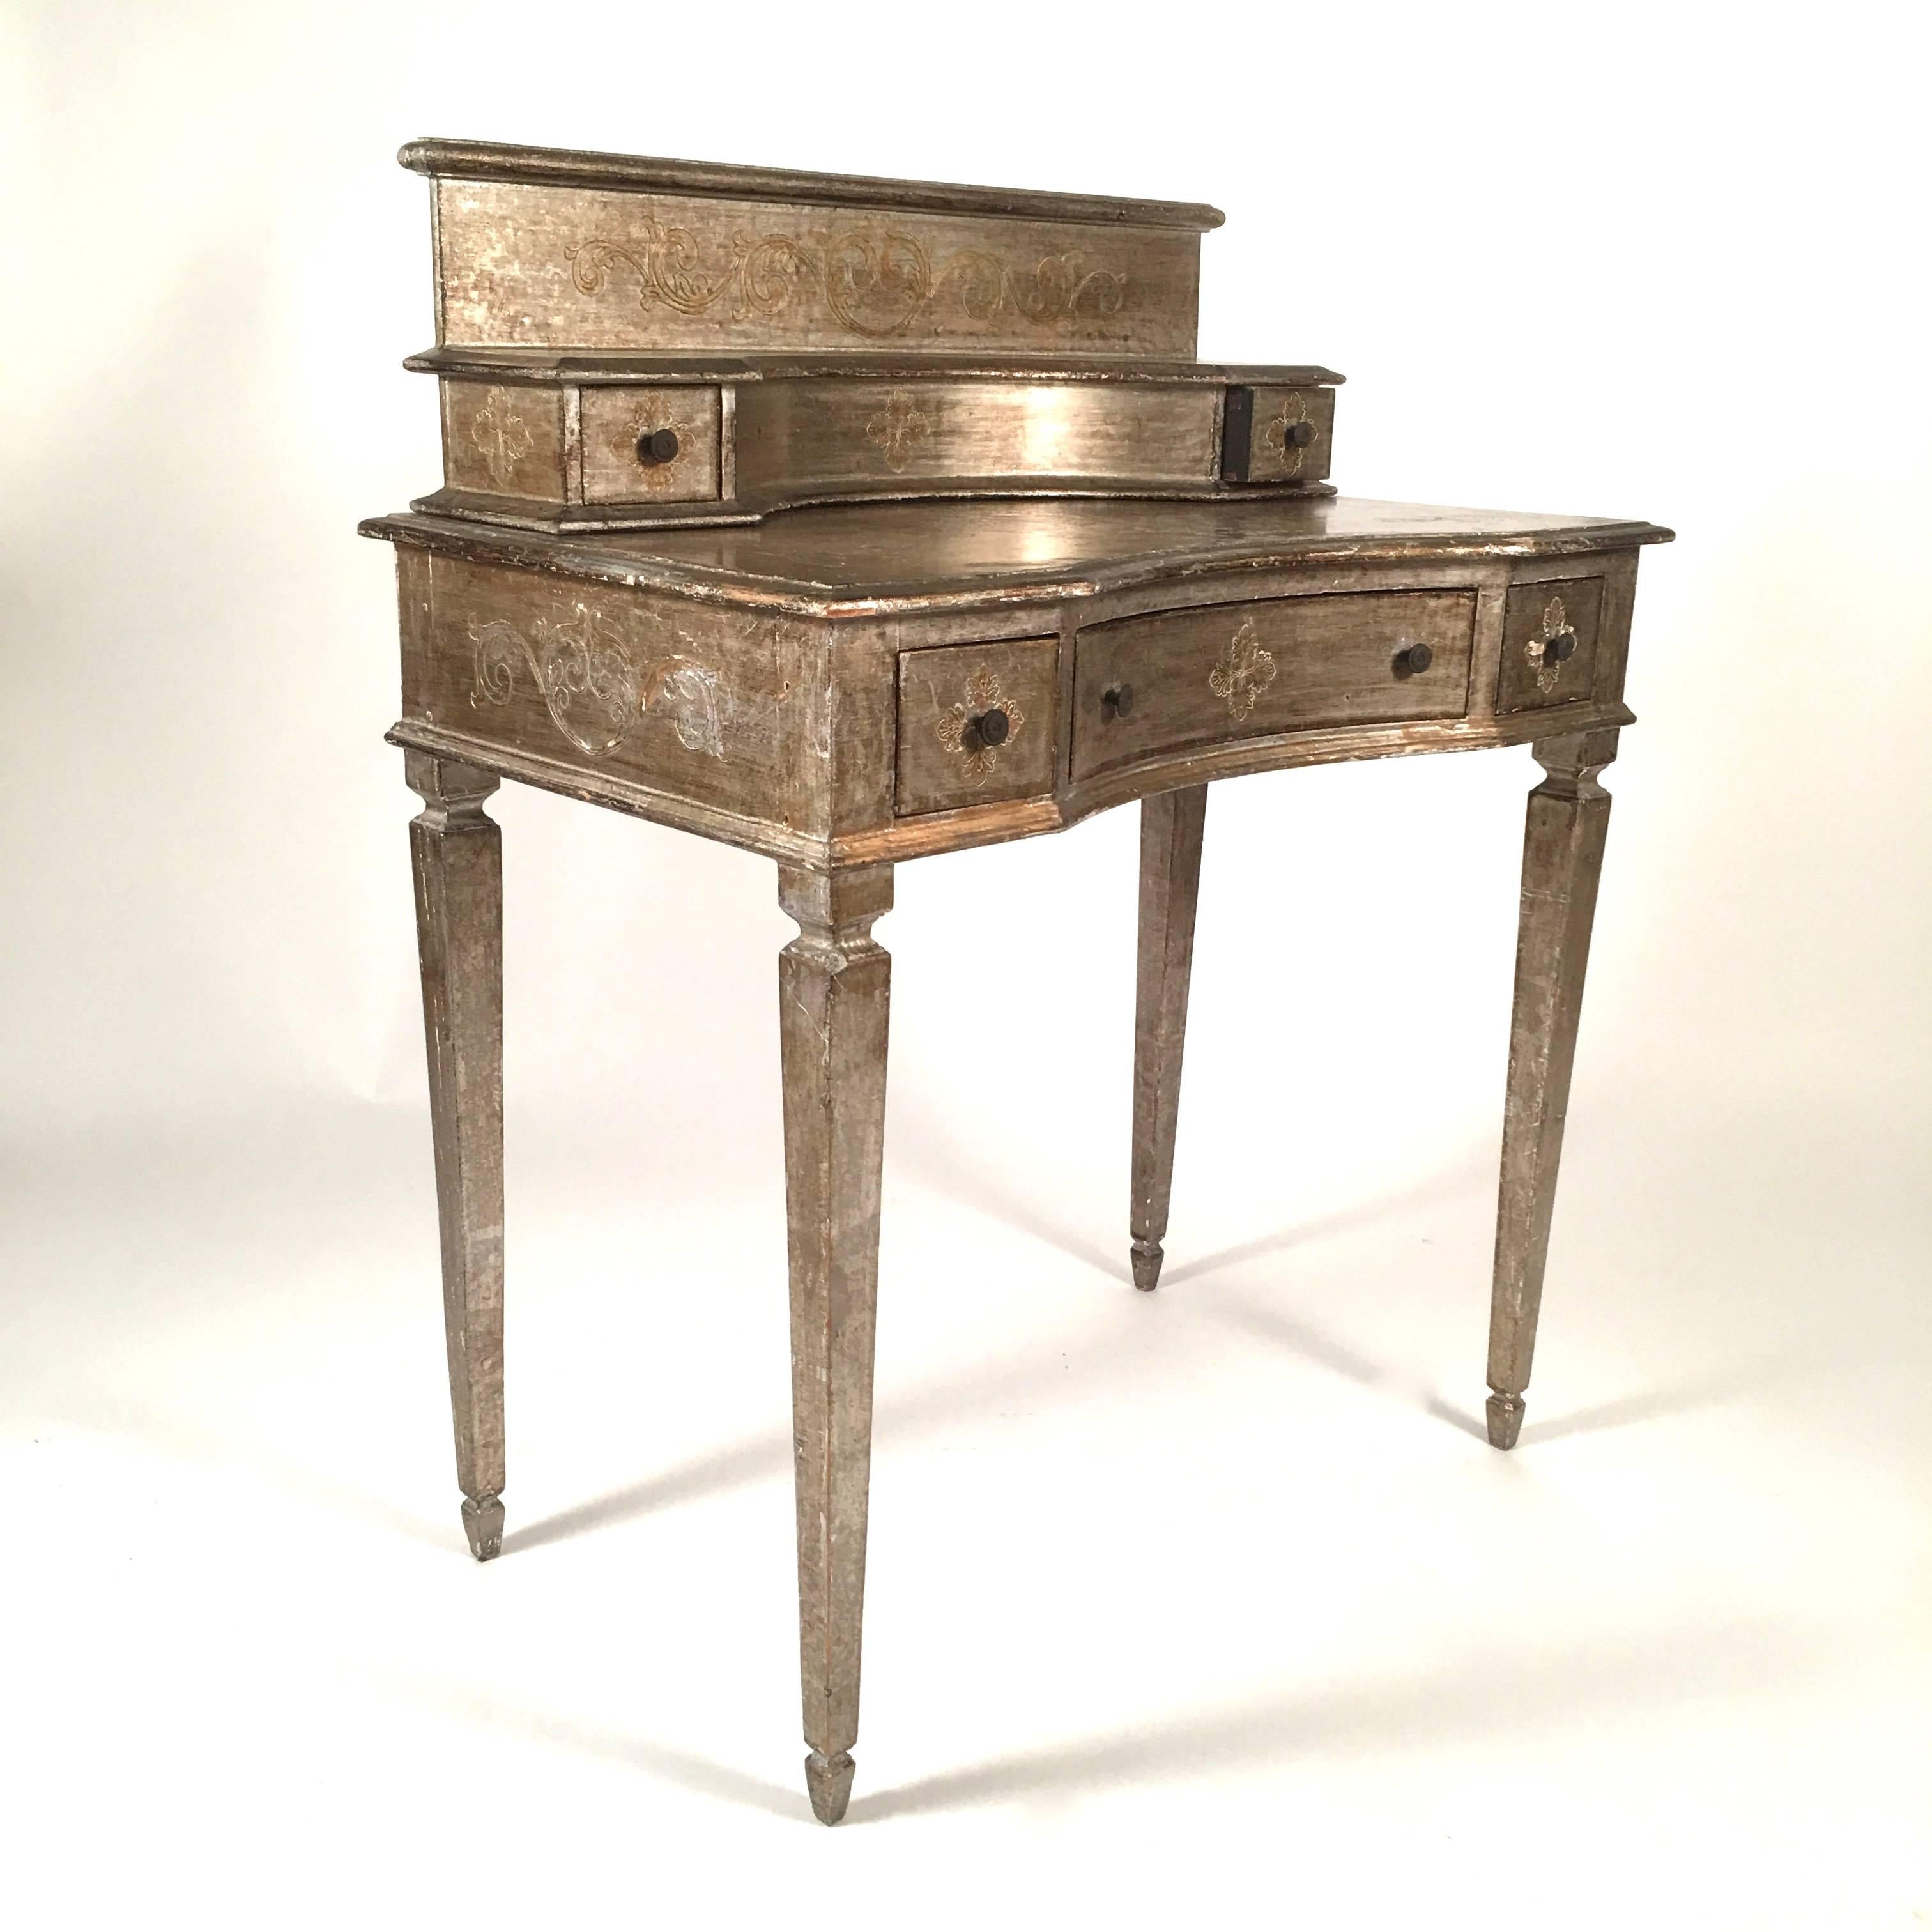 An Italian, likely Florentine, silver leafed dressing or writing table, vanity, the surface decorated with incised scrolled floral and foliate ornament, of rectangular form, the removable superstructure with a gallery top over a semi circular curved